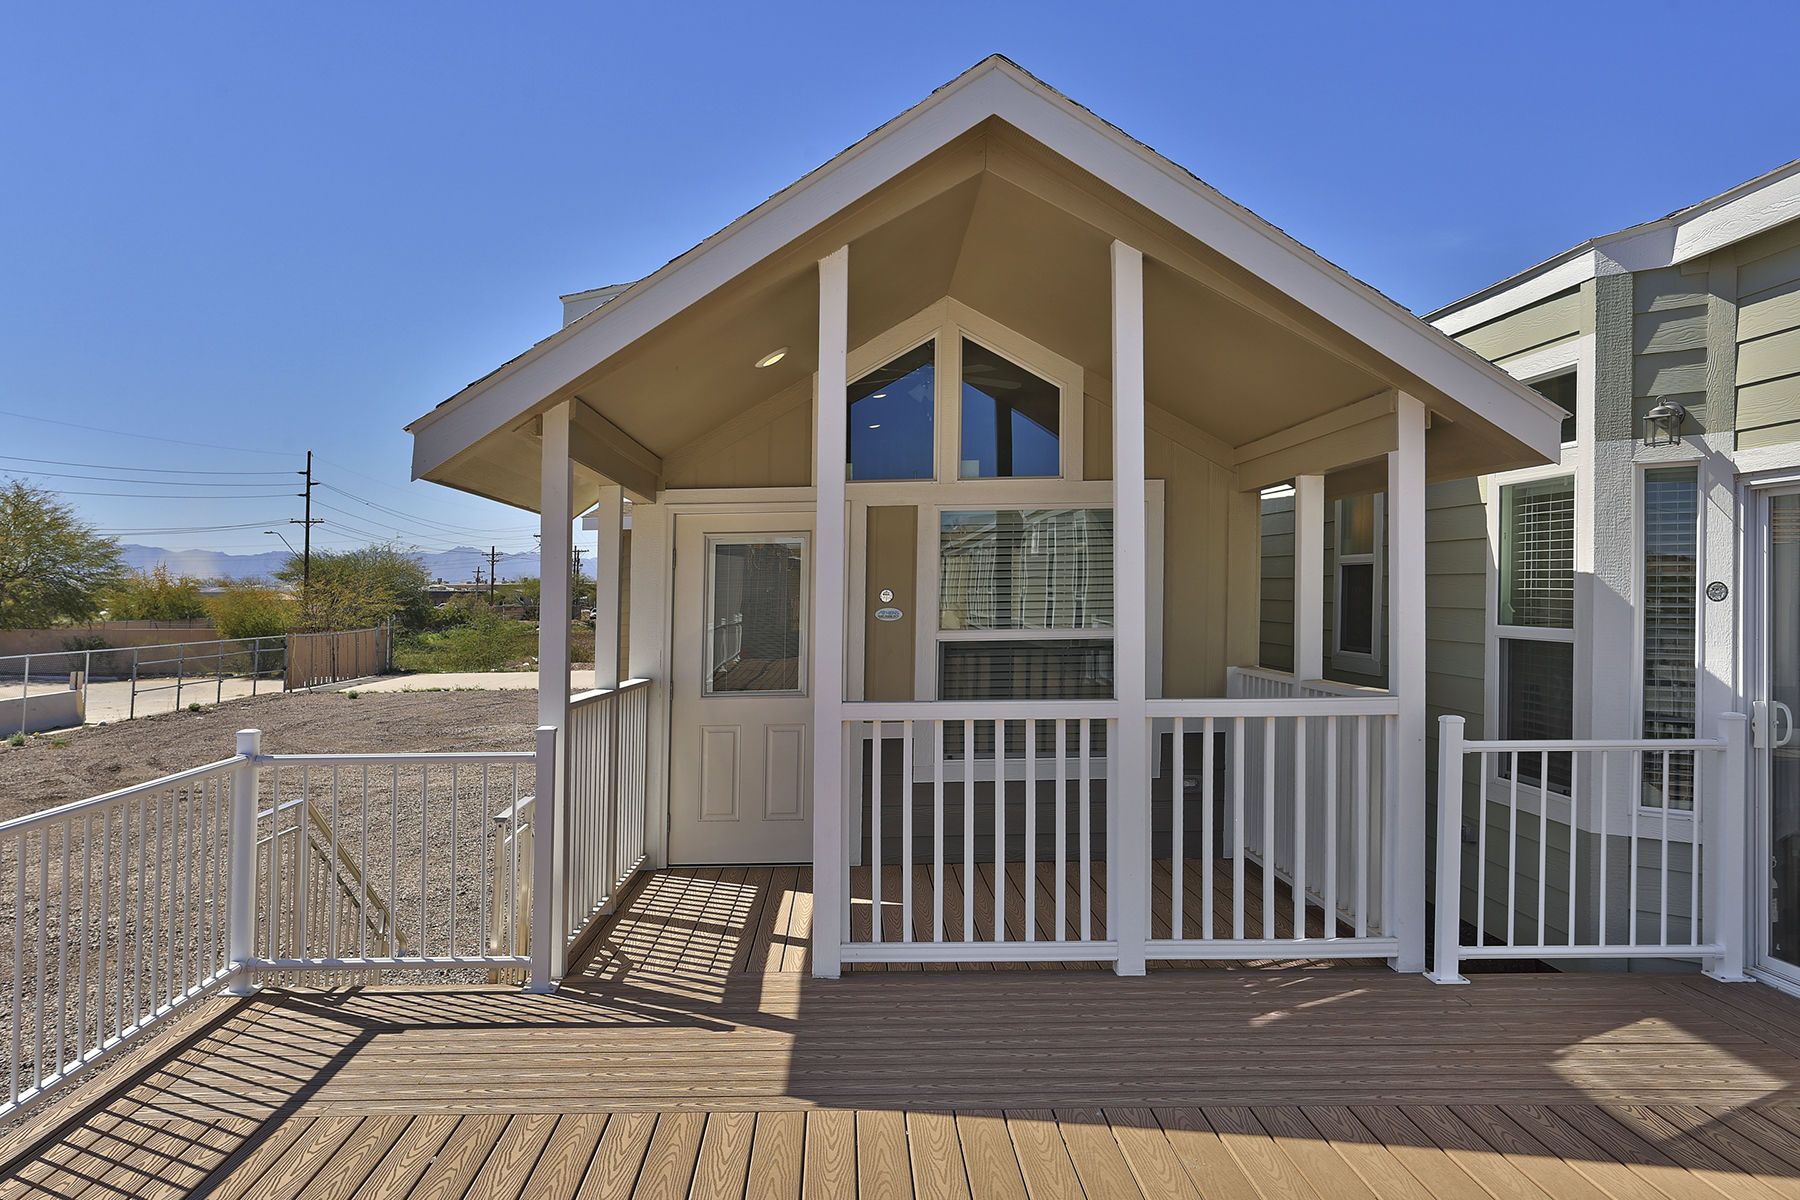 Champion Arizona 1 Bedroom Manufactured Home Bluewater for 